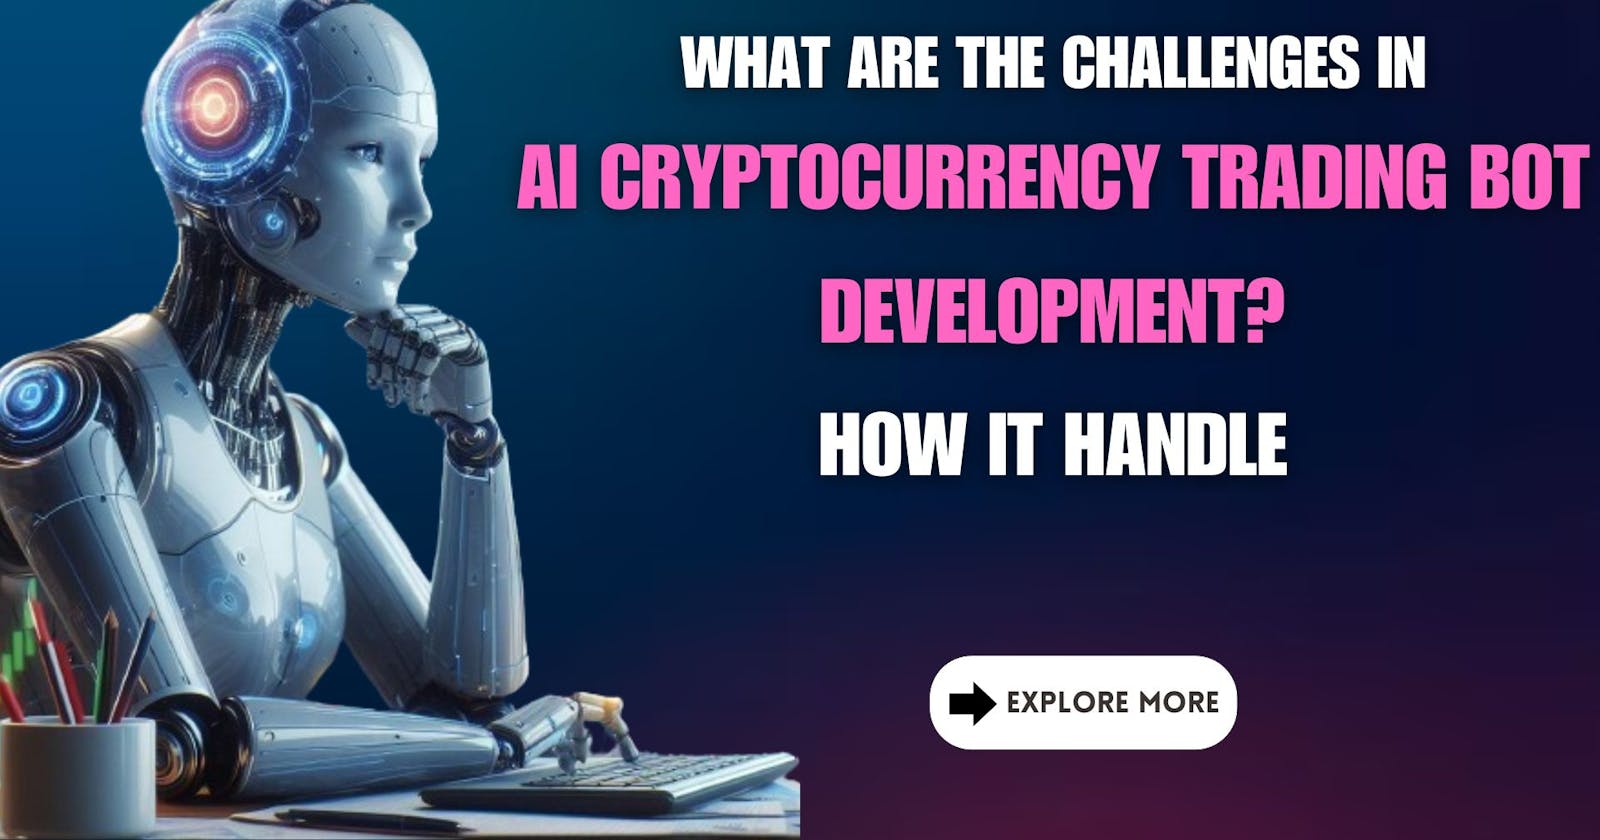 What are the Challenges in AI Cryptocurrency Trading Bot Development? how it Handle